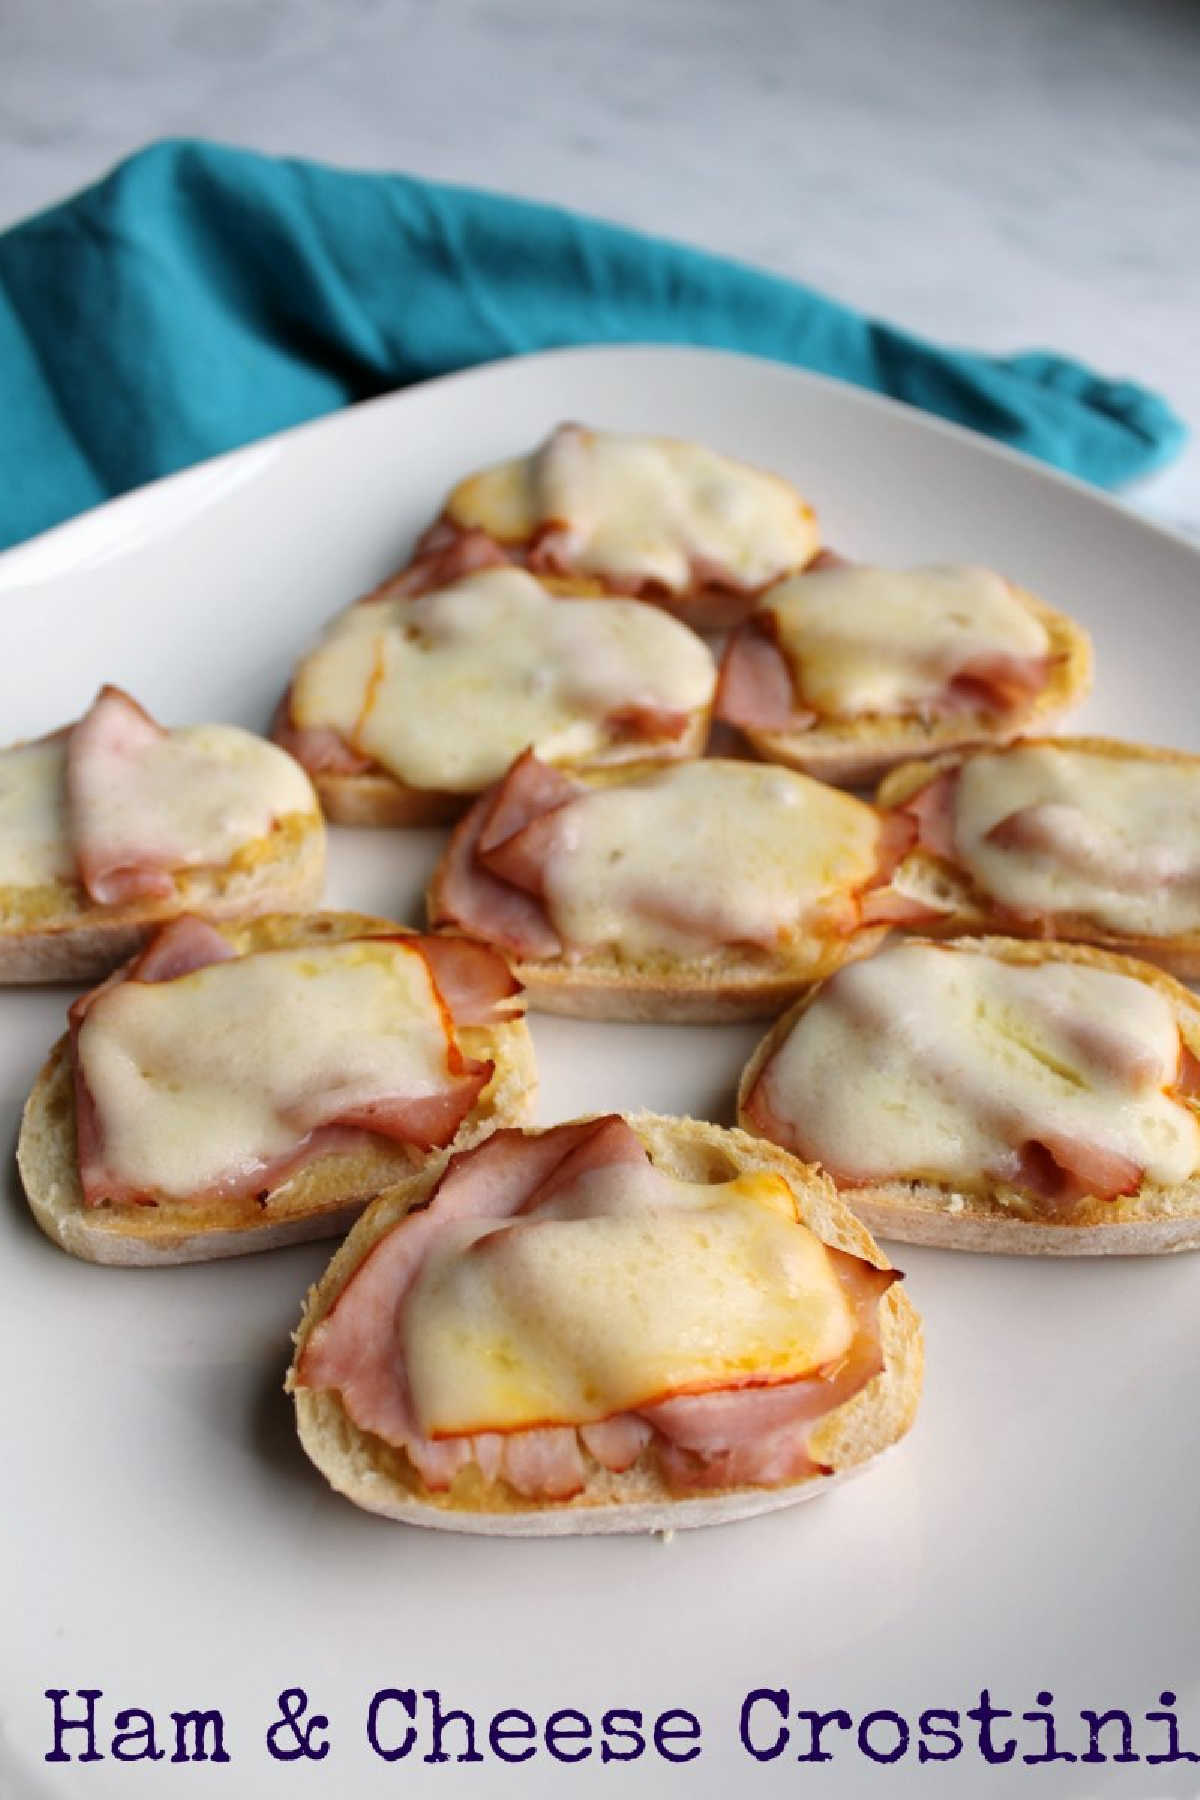 Ham and cheese crostini are the perfect appetizer no matter the occasion. Sliced baguette with mustard, ham and melted cheese come together for a simple but delicious finger food. We like them so much, we often make a meal of them!